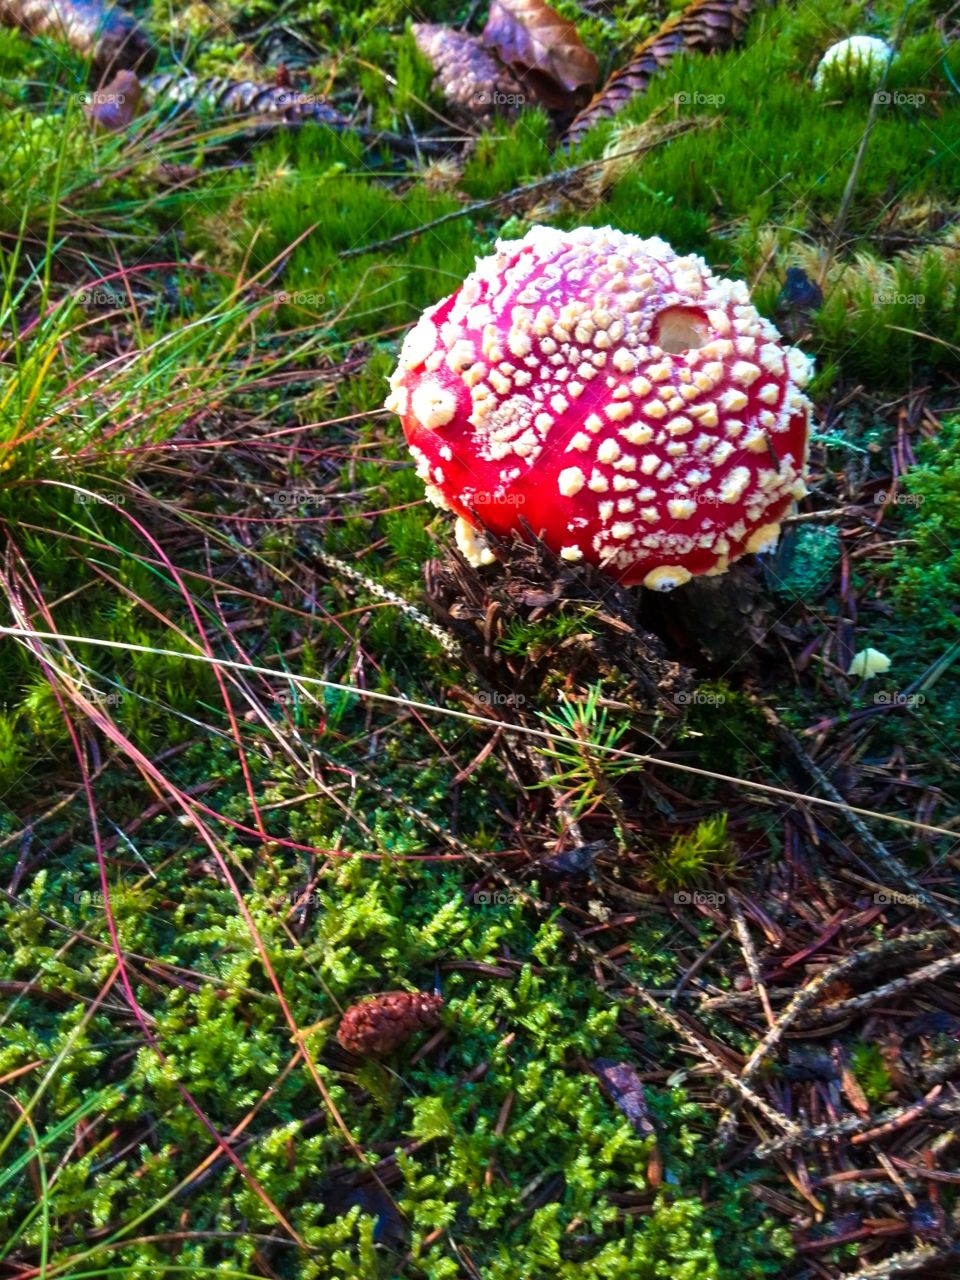 Red and white dotted fly agaric mushroom